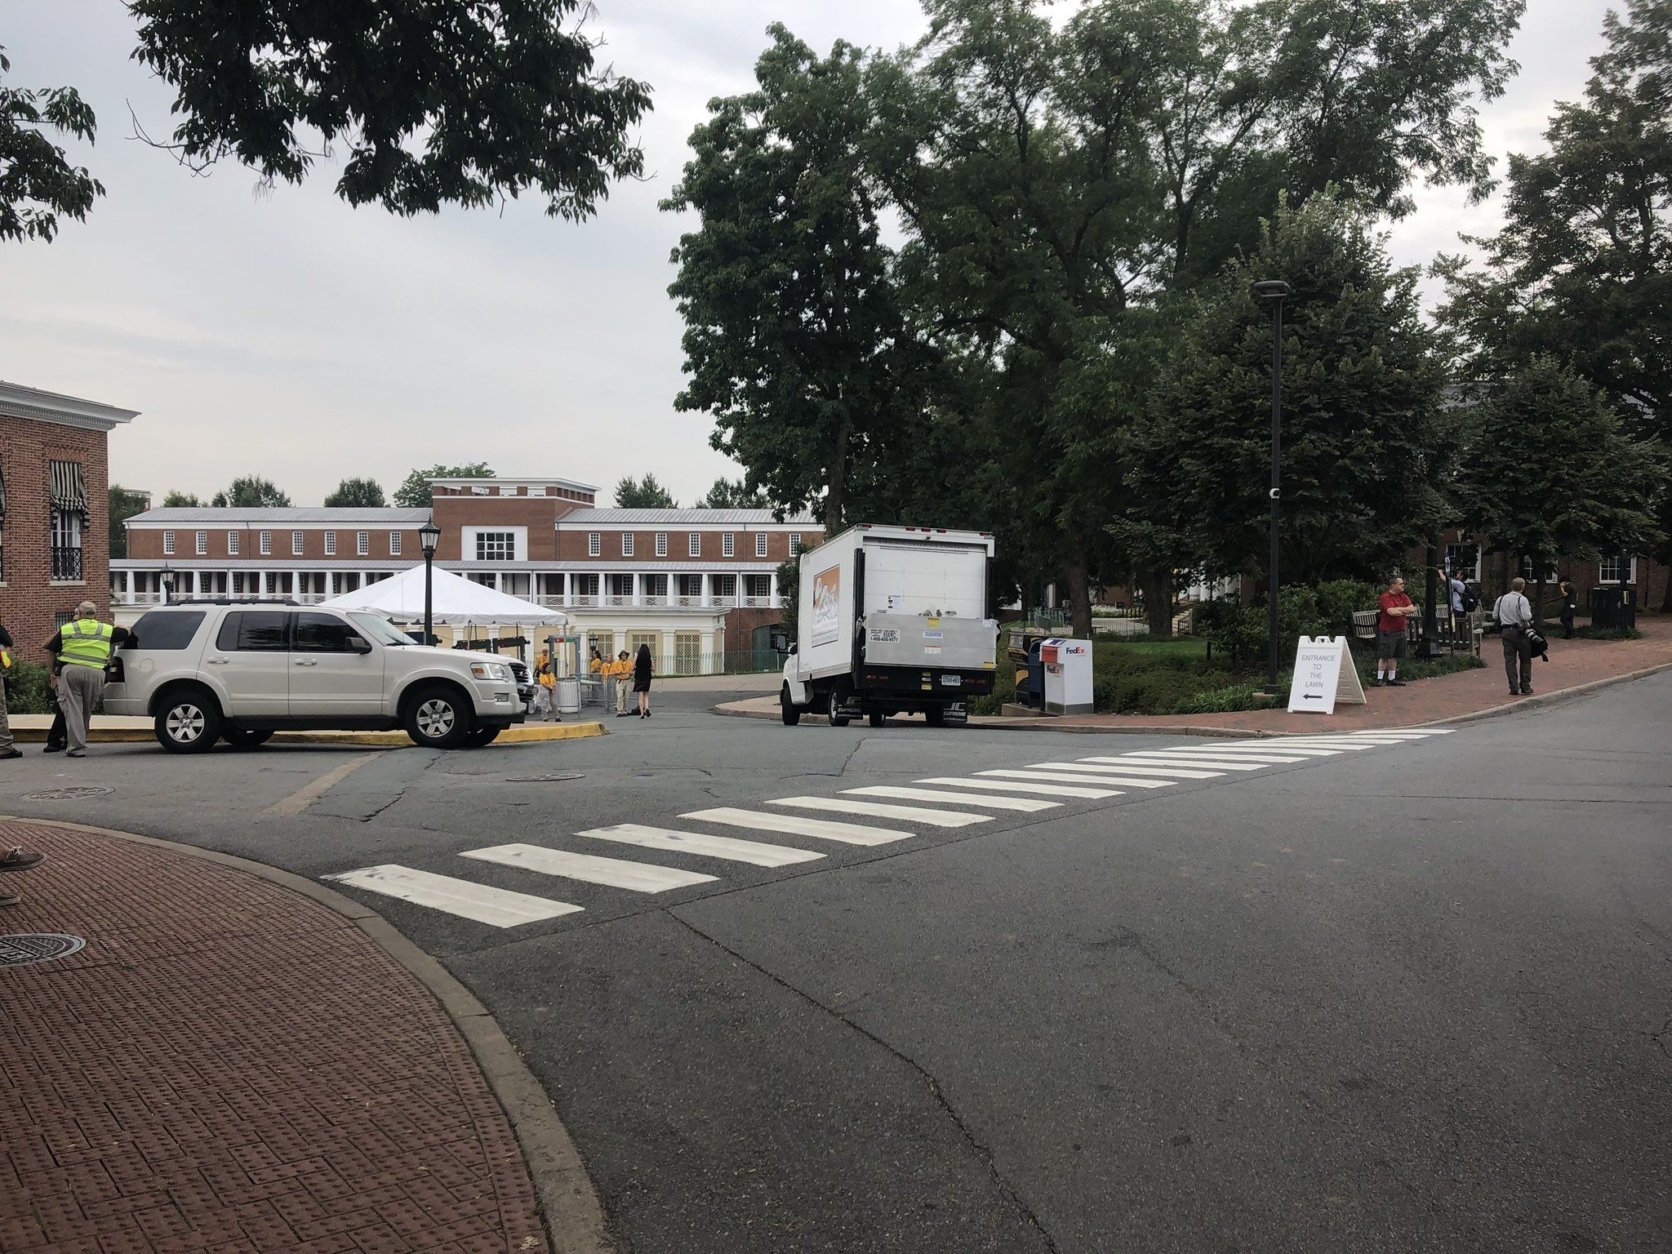 A security checkpoint is seen for Saturday morning's "The Hope that Summons Us" event at the University of Virginia. It comes one year after white supremacists marched through the Grounds with tiki torches, and a day before anniversary of Heather Heyer’s death. (WTOP/Max Smith)